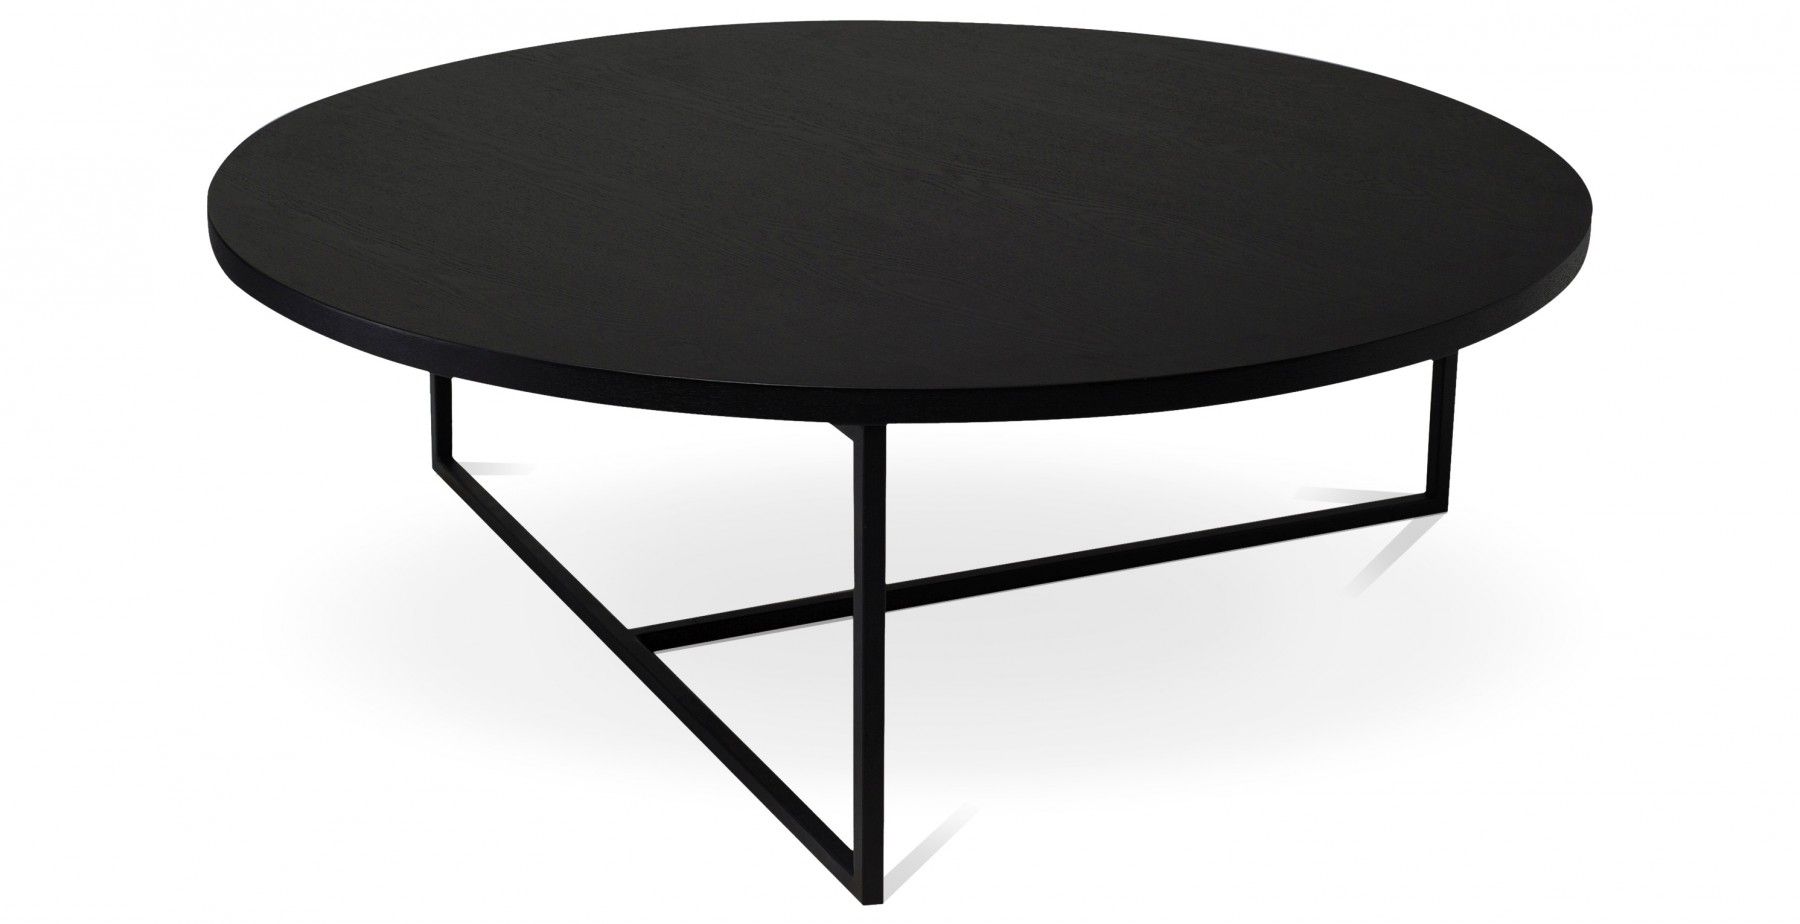 Black Turner Round Coffee Table Round Black Coffee Table Triangle Leg Urner Round Coffee Table For A Solution To Living Space Display And Storage Woes (View 1 of 10)